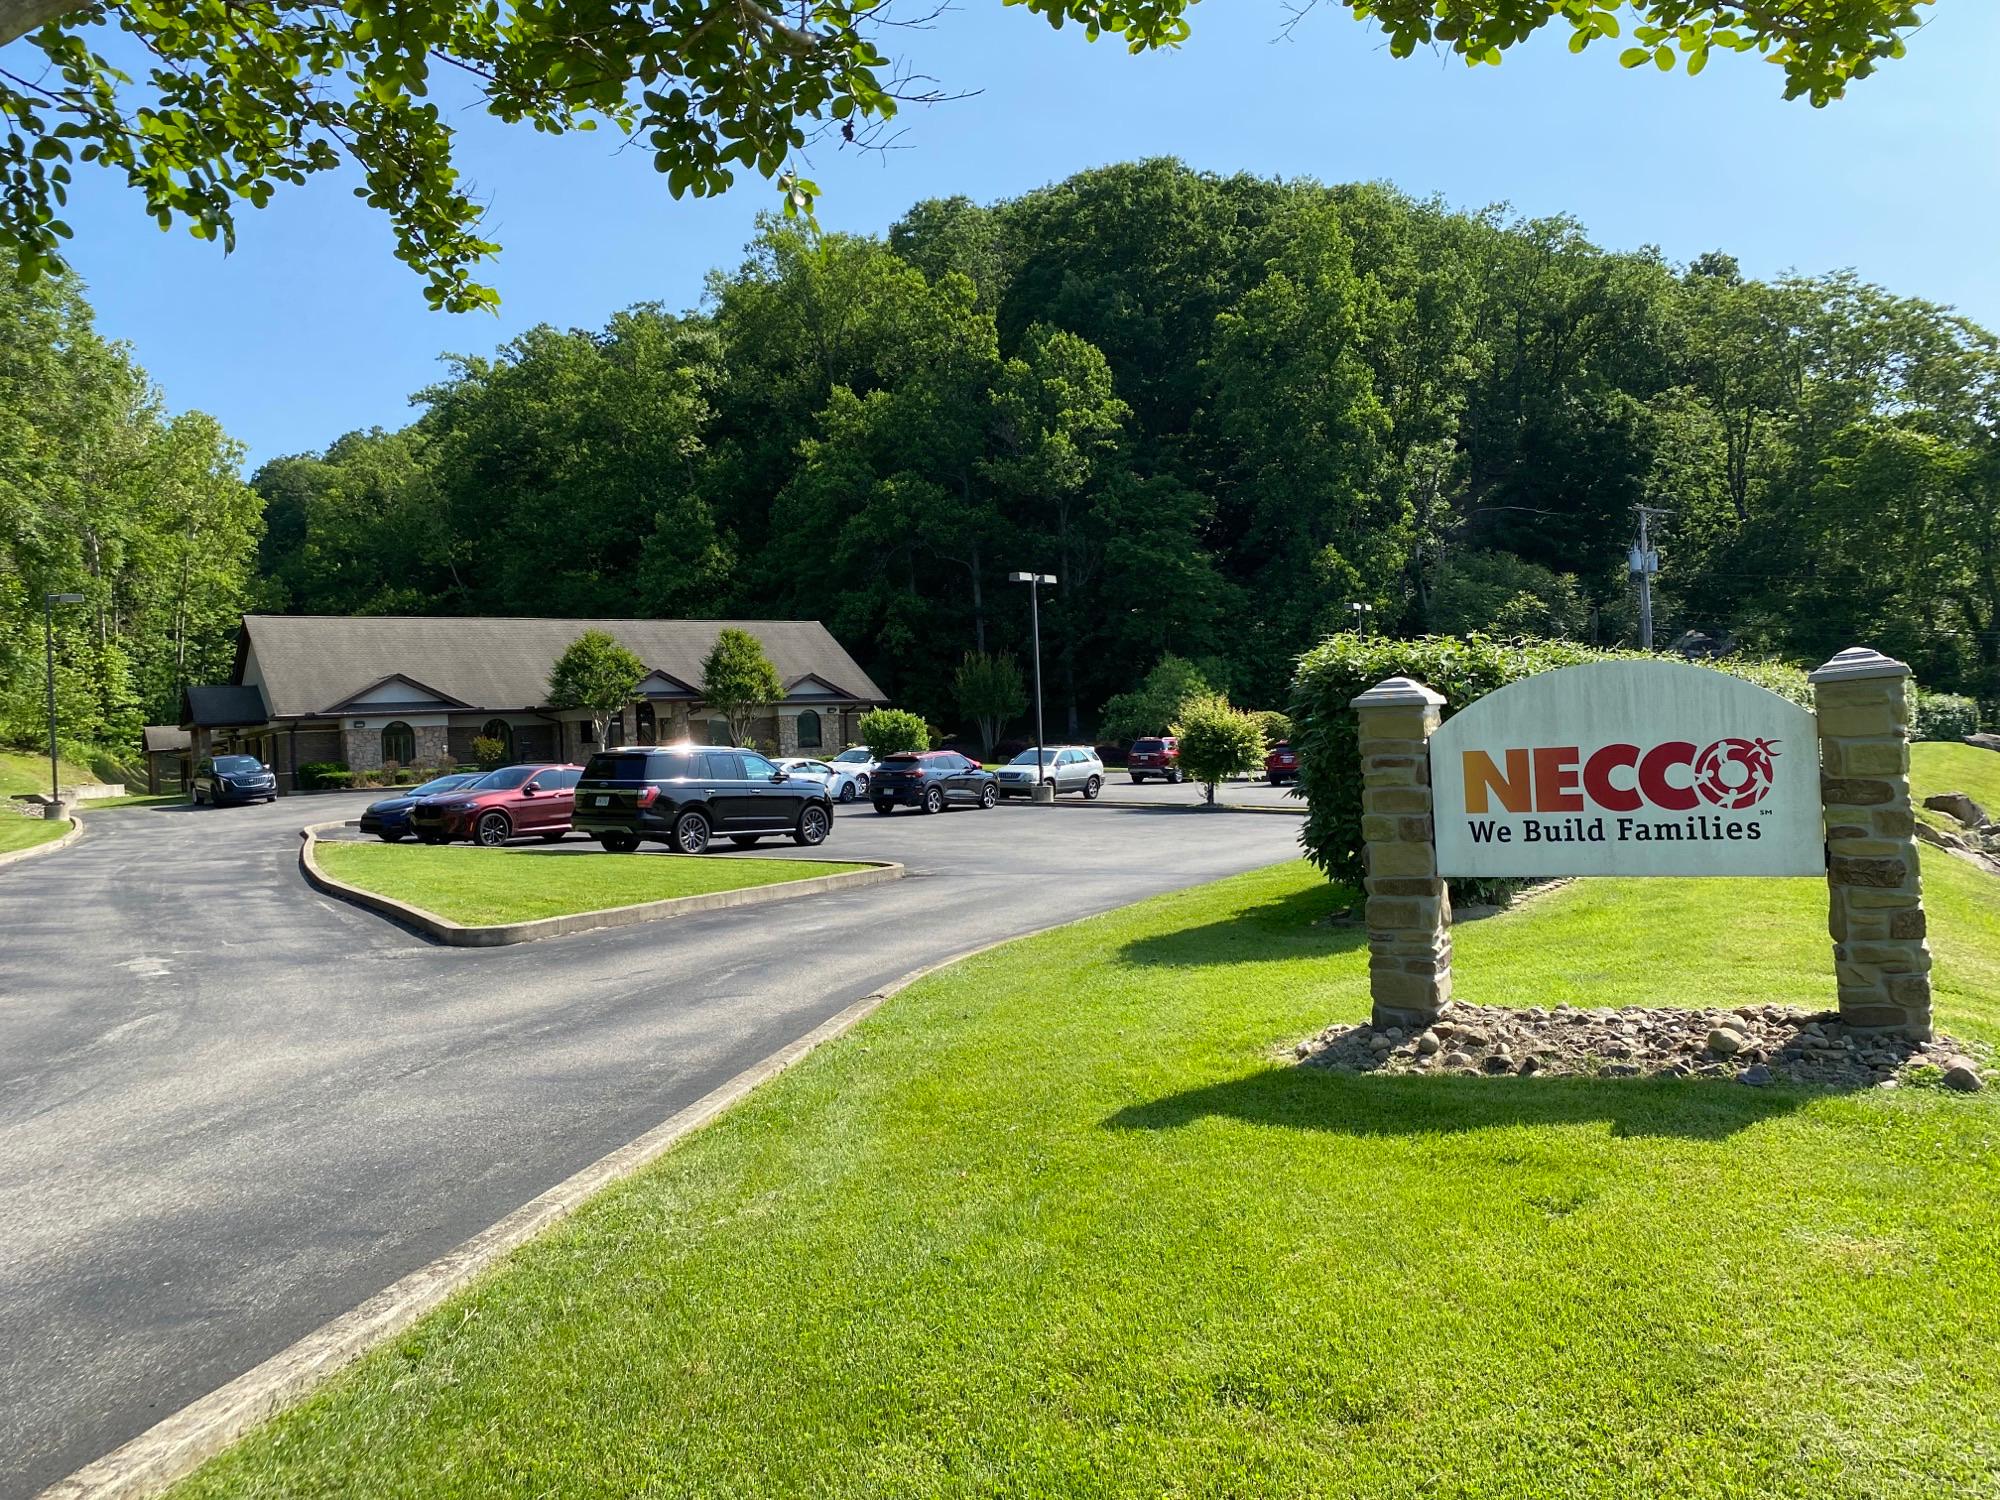 Necco signage outside of Necco South Point office.